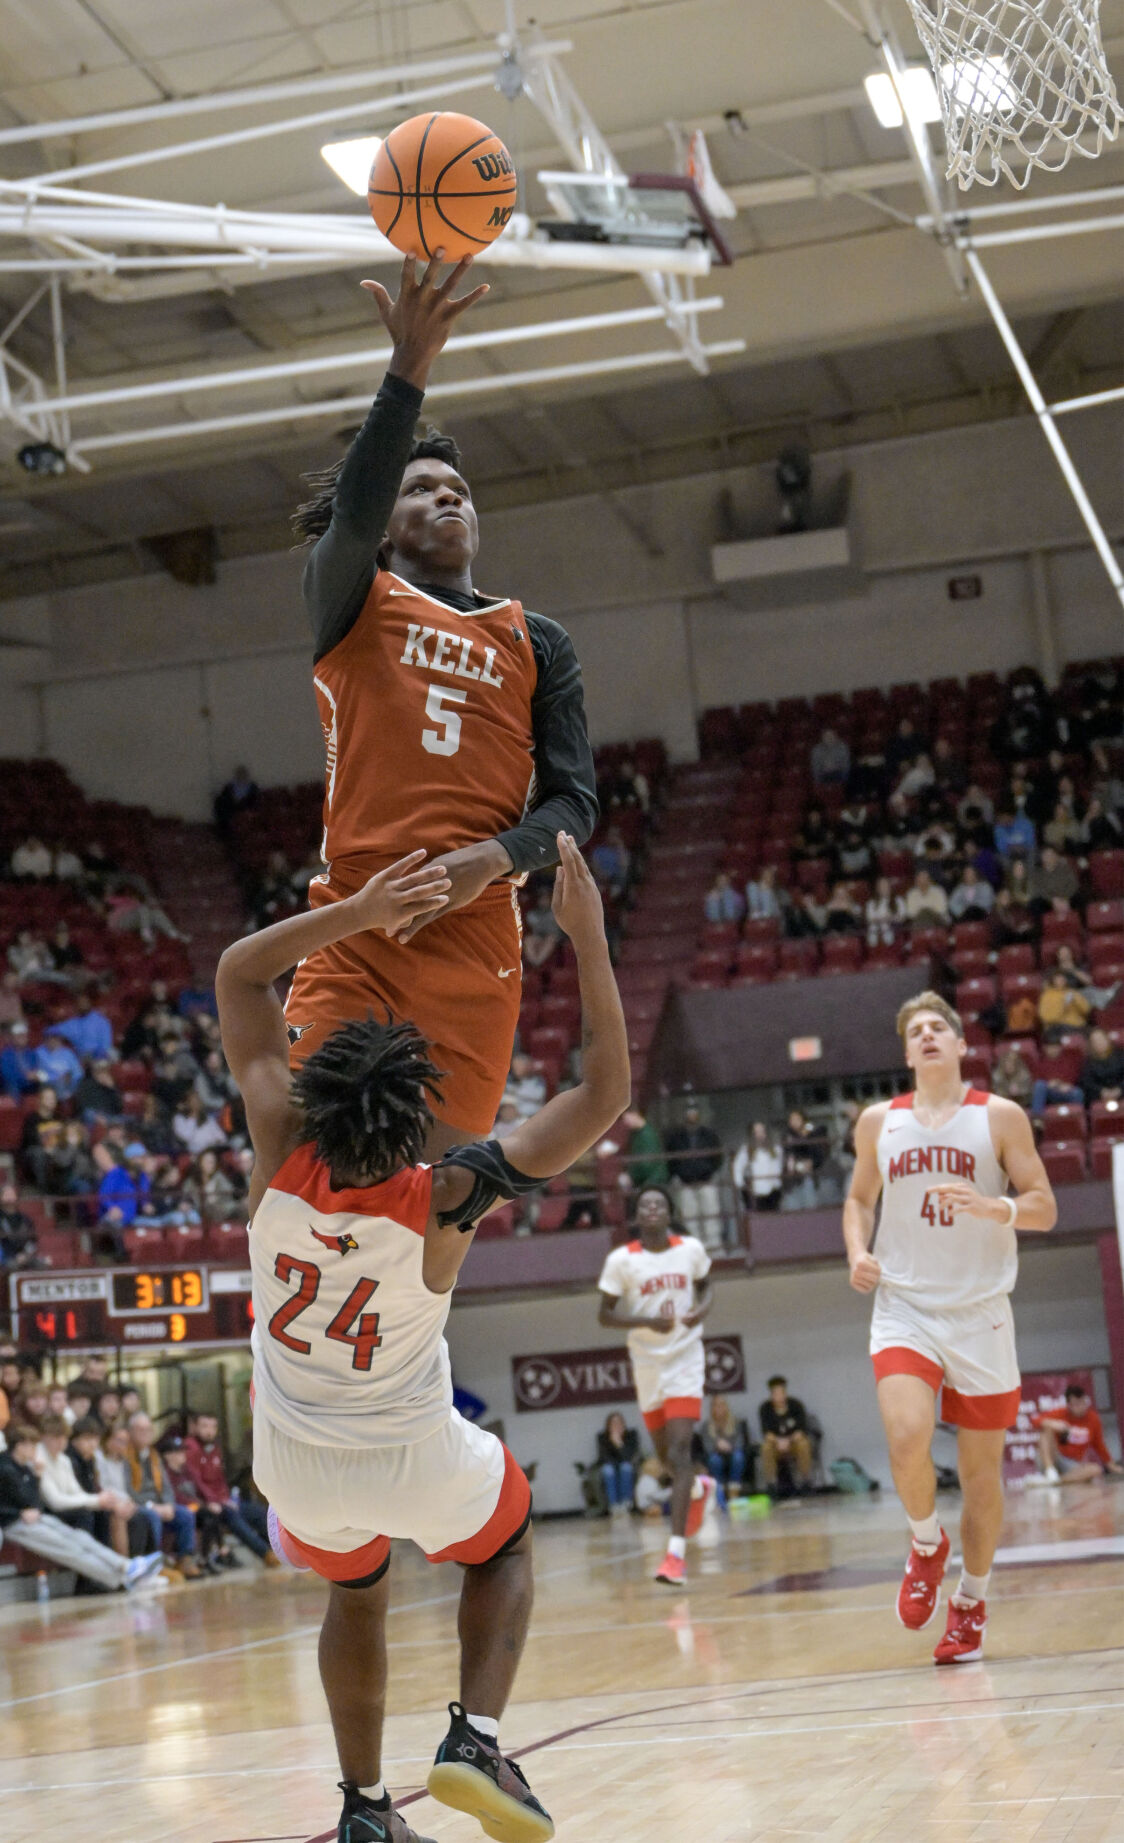 Kell Longhorns Showcase Dominant Speed and Defense in 93-67 Victory Over Mentor Cardinals